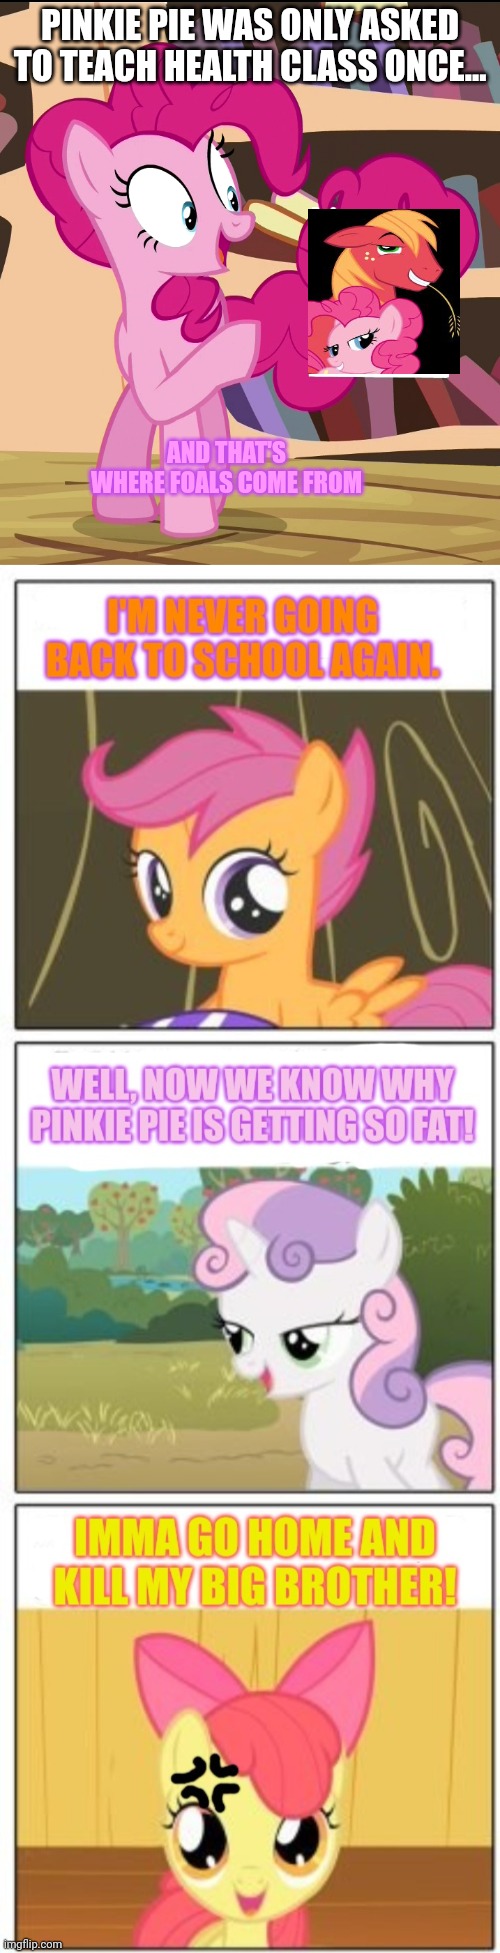 Pinkie pie problems | PINKIE PIE WAS ONLY ASKED TO TEACH HEALTH CLASS ONCE... AND THAT'S WHERE FOALS COME FROM | image tagged in pinkie pie,worst,substitute teacher | made w/ Imgflip meme maker